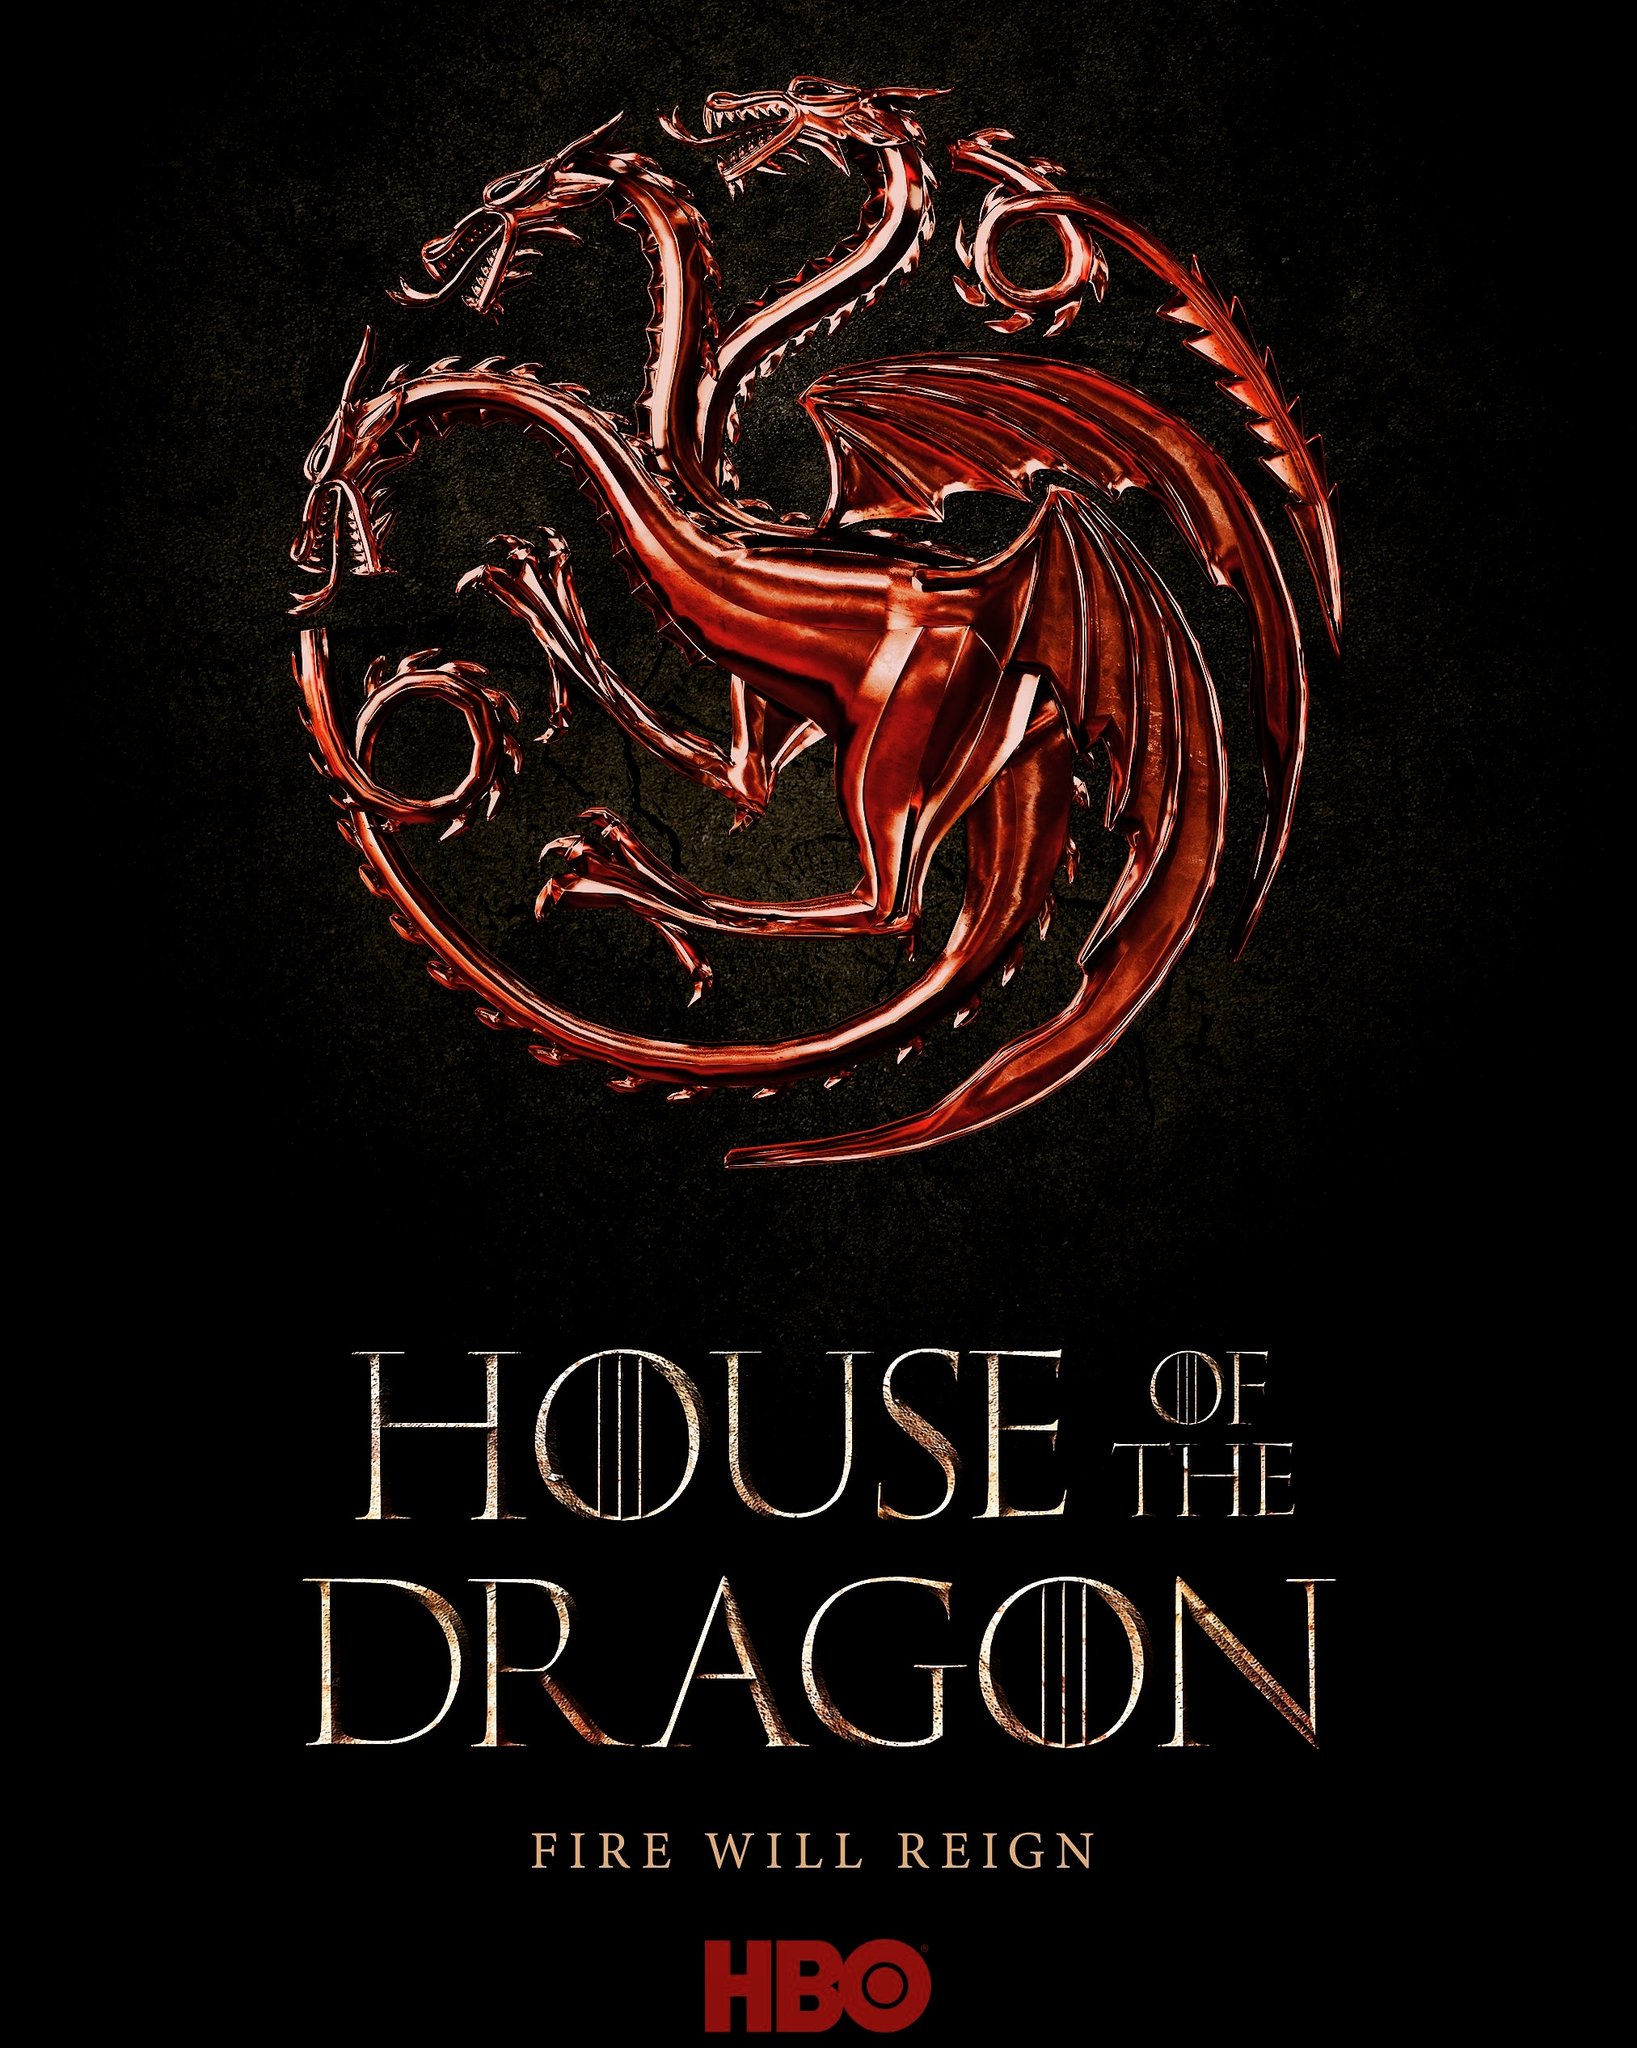 Game Of Thrones - House of the Dragon